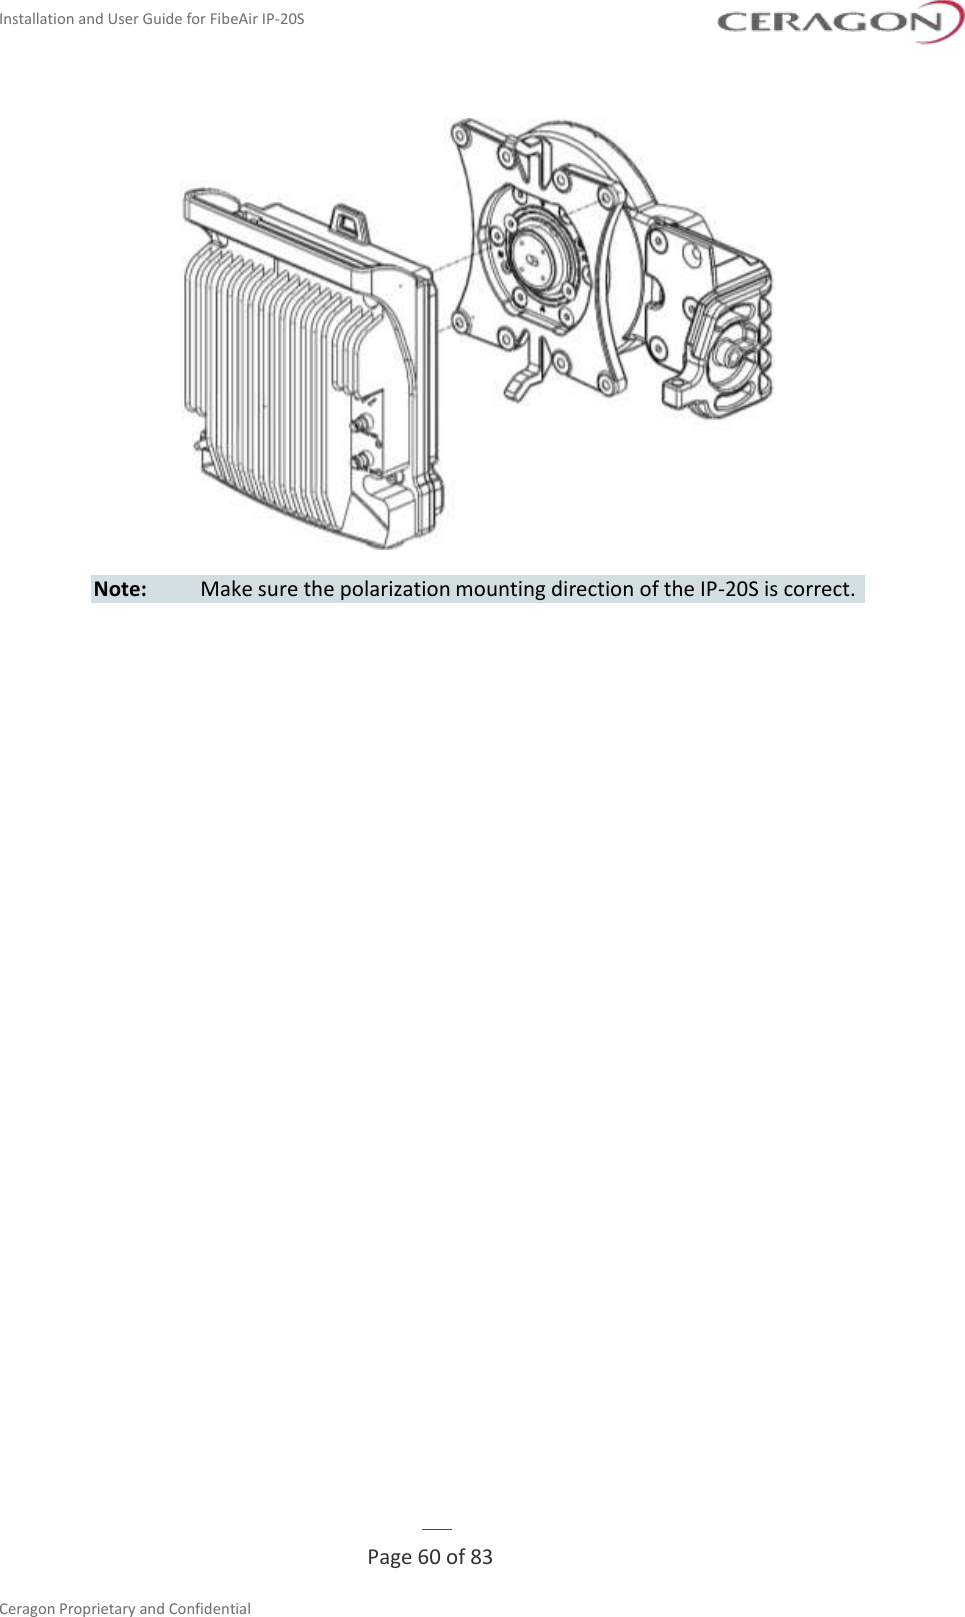 Installation and User Guide for FibeAir IP-20S   Page 60 of 83  Ceragon Proprietary and Confidential      Note:  Make sure the polarization mounting direction of the IP-20S is correct.  